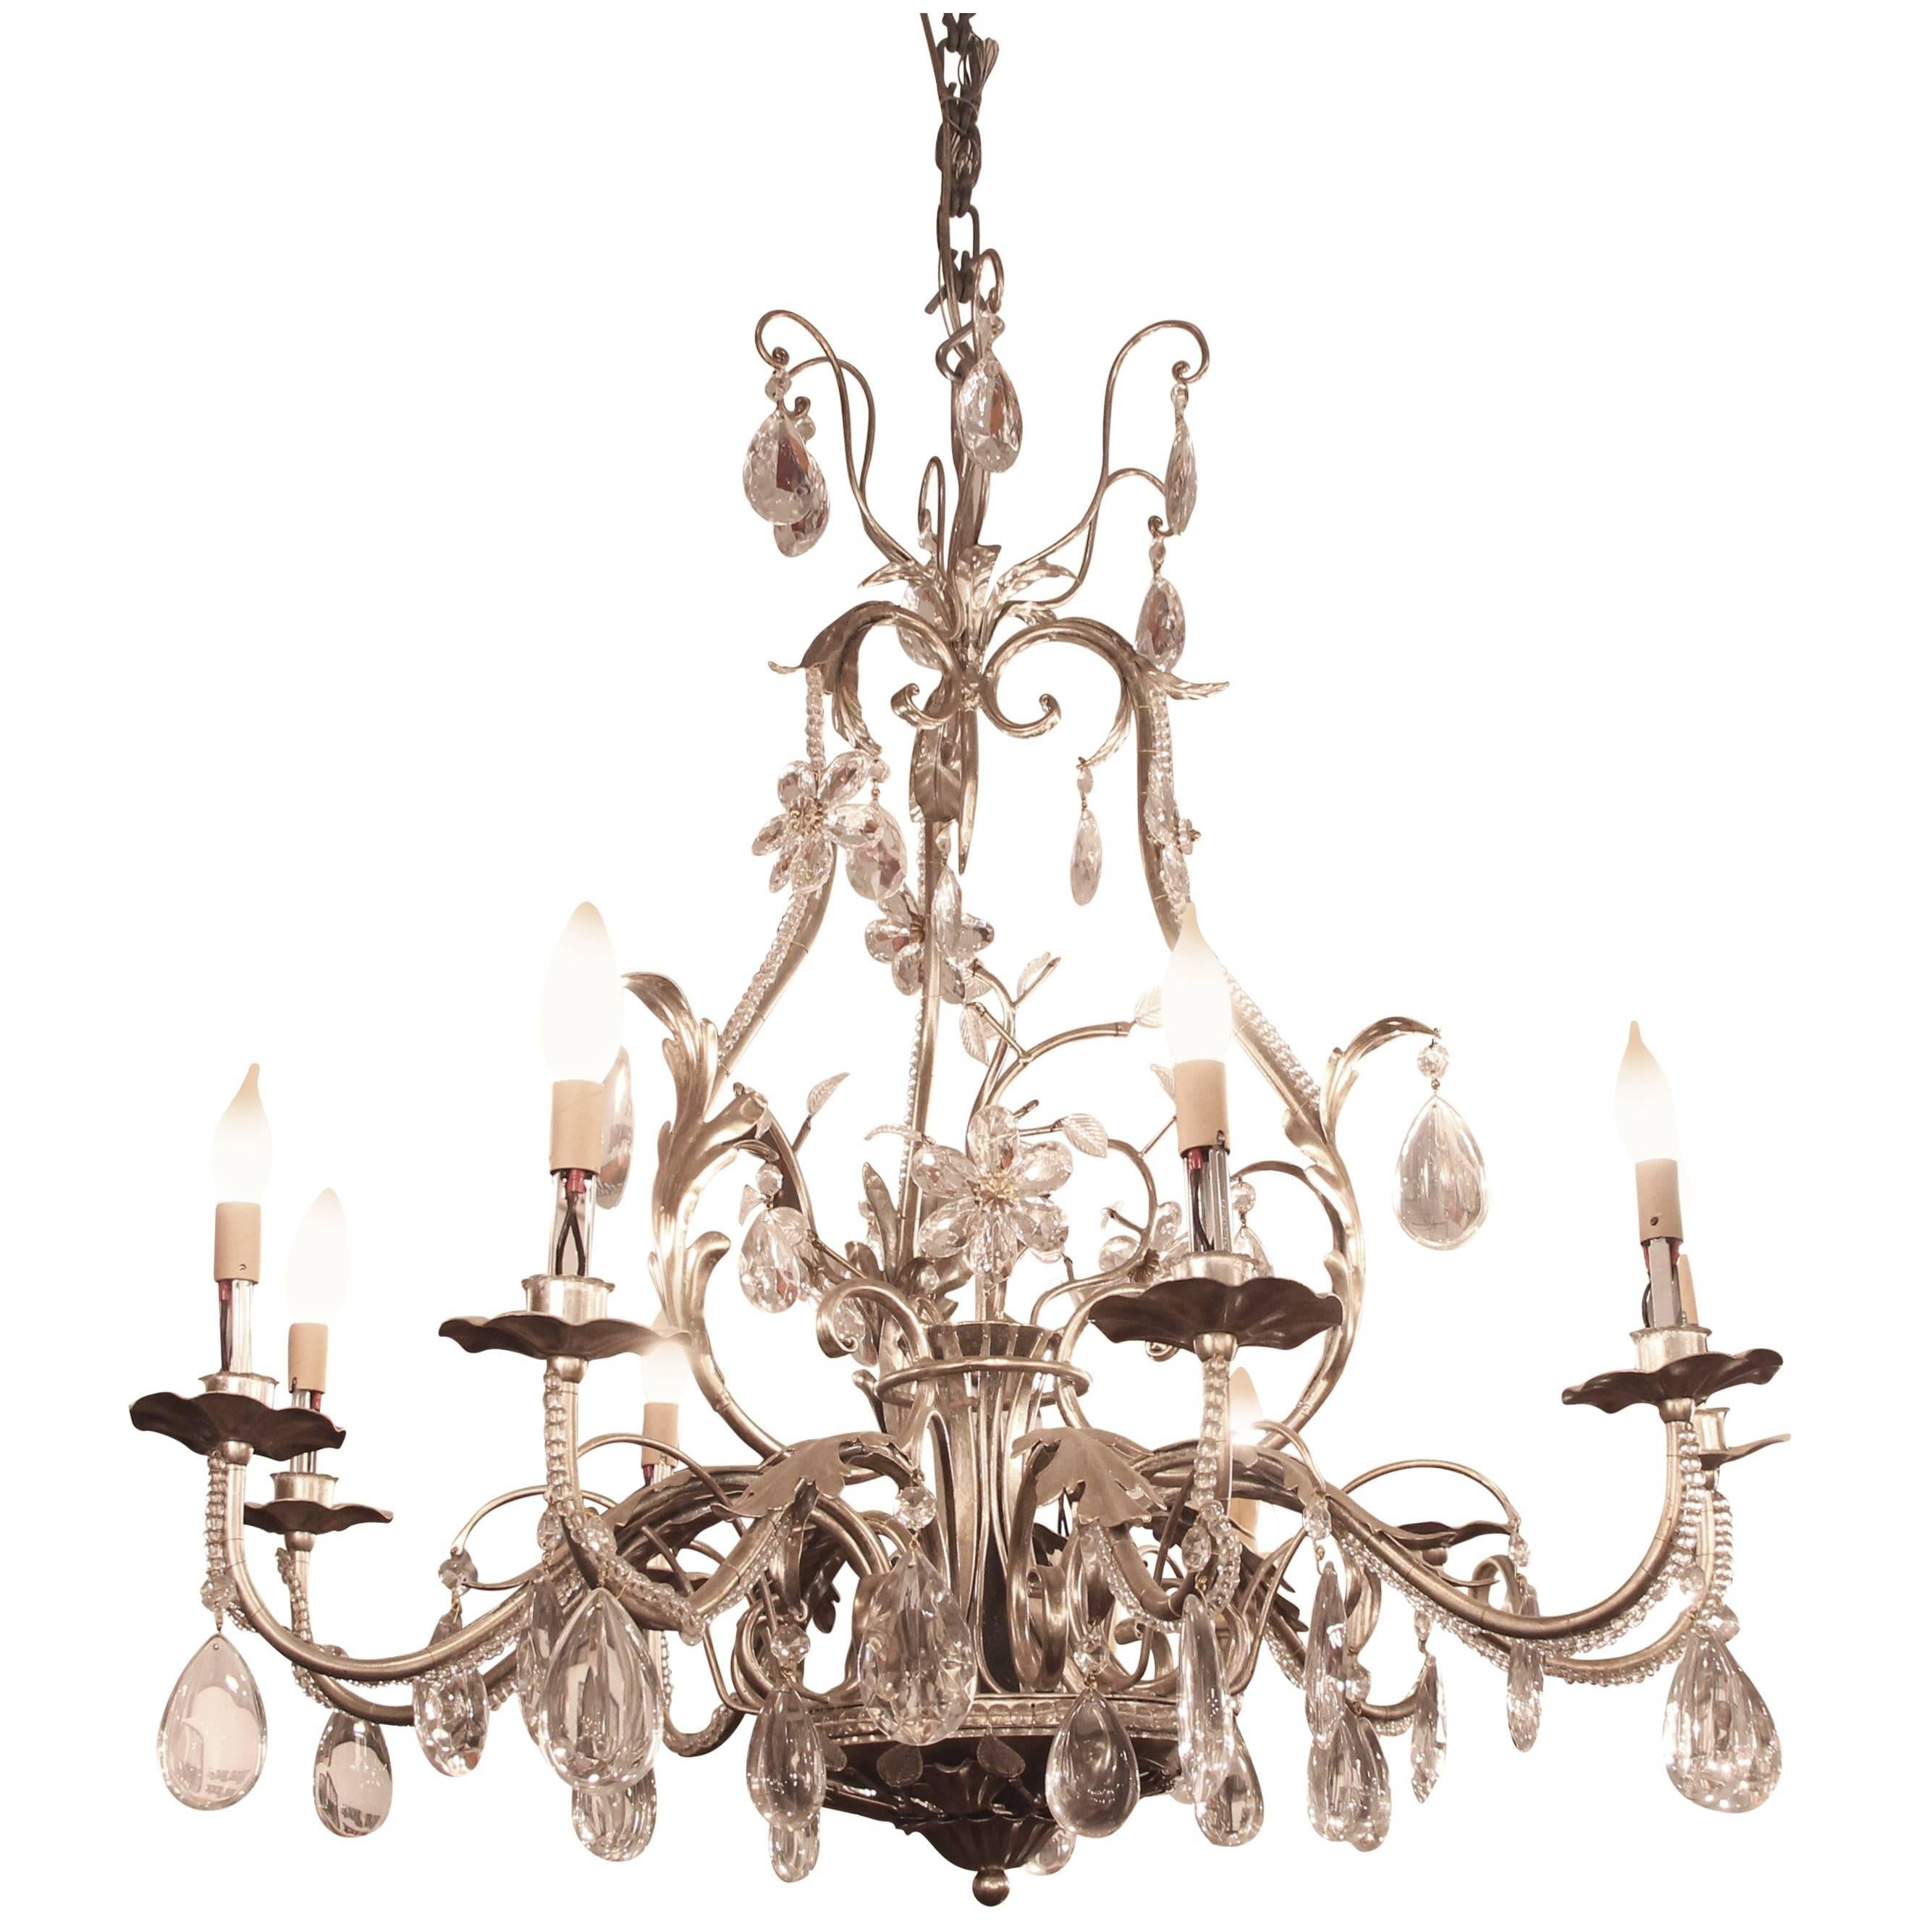 2005 Florentine Style Steel and Crystal Chandelier with Nine Arms